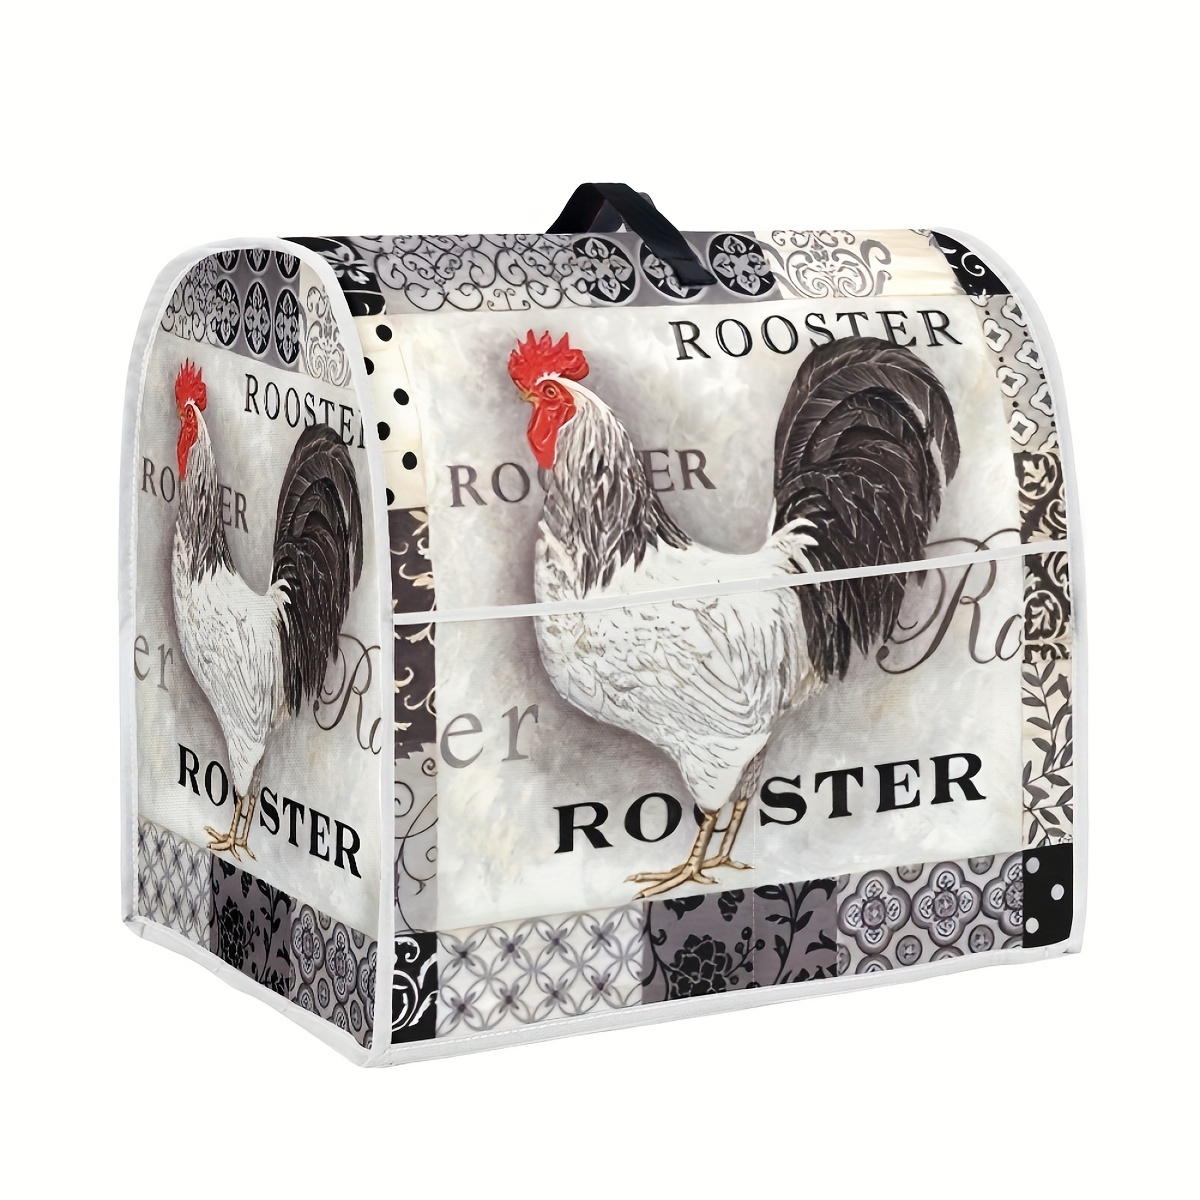 

1pc Rooster Pattern Dust-proof Cover For Kitchen Aid Mixer Or Coffee Maker, Appliance Dust Cover Kitchen Appliance Accessories With Pocket And Handle, Easy To Clean - Size L